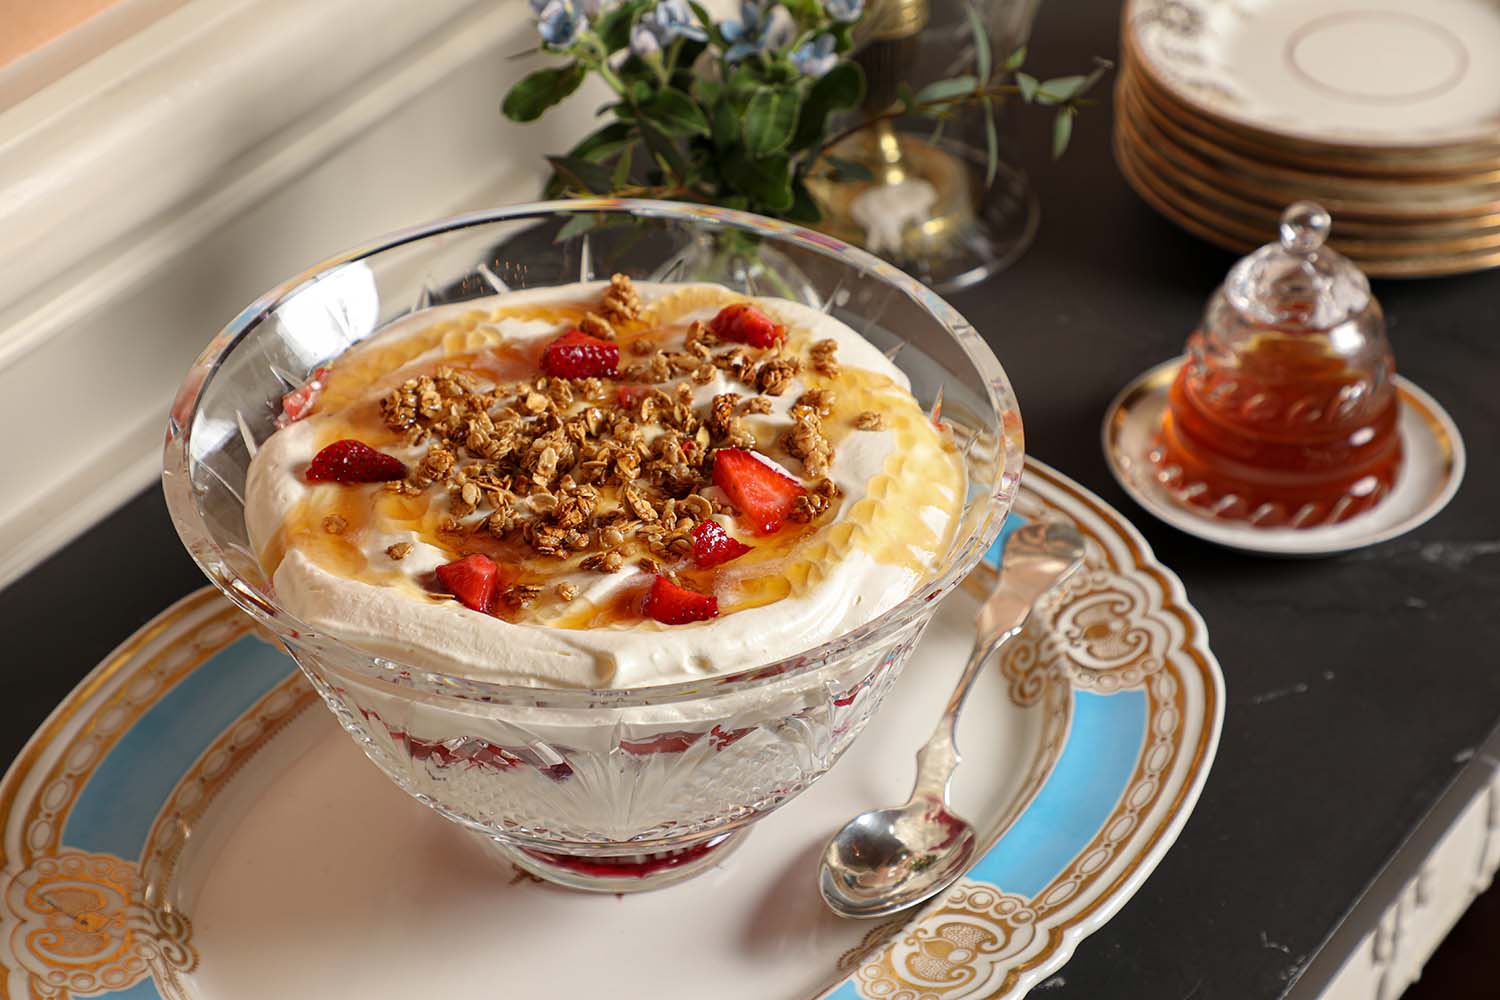 A bowl of creamy cranachan and strawberries sit on a platter.